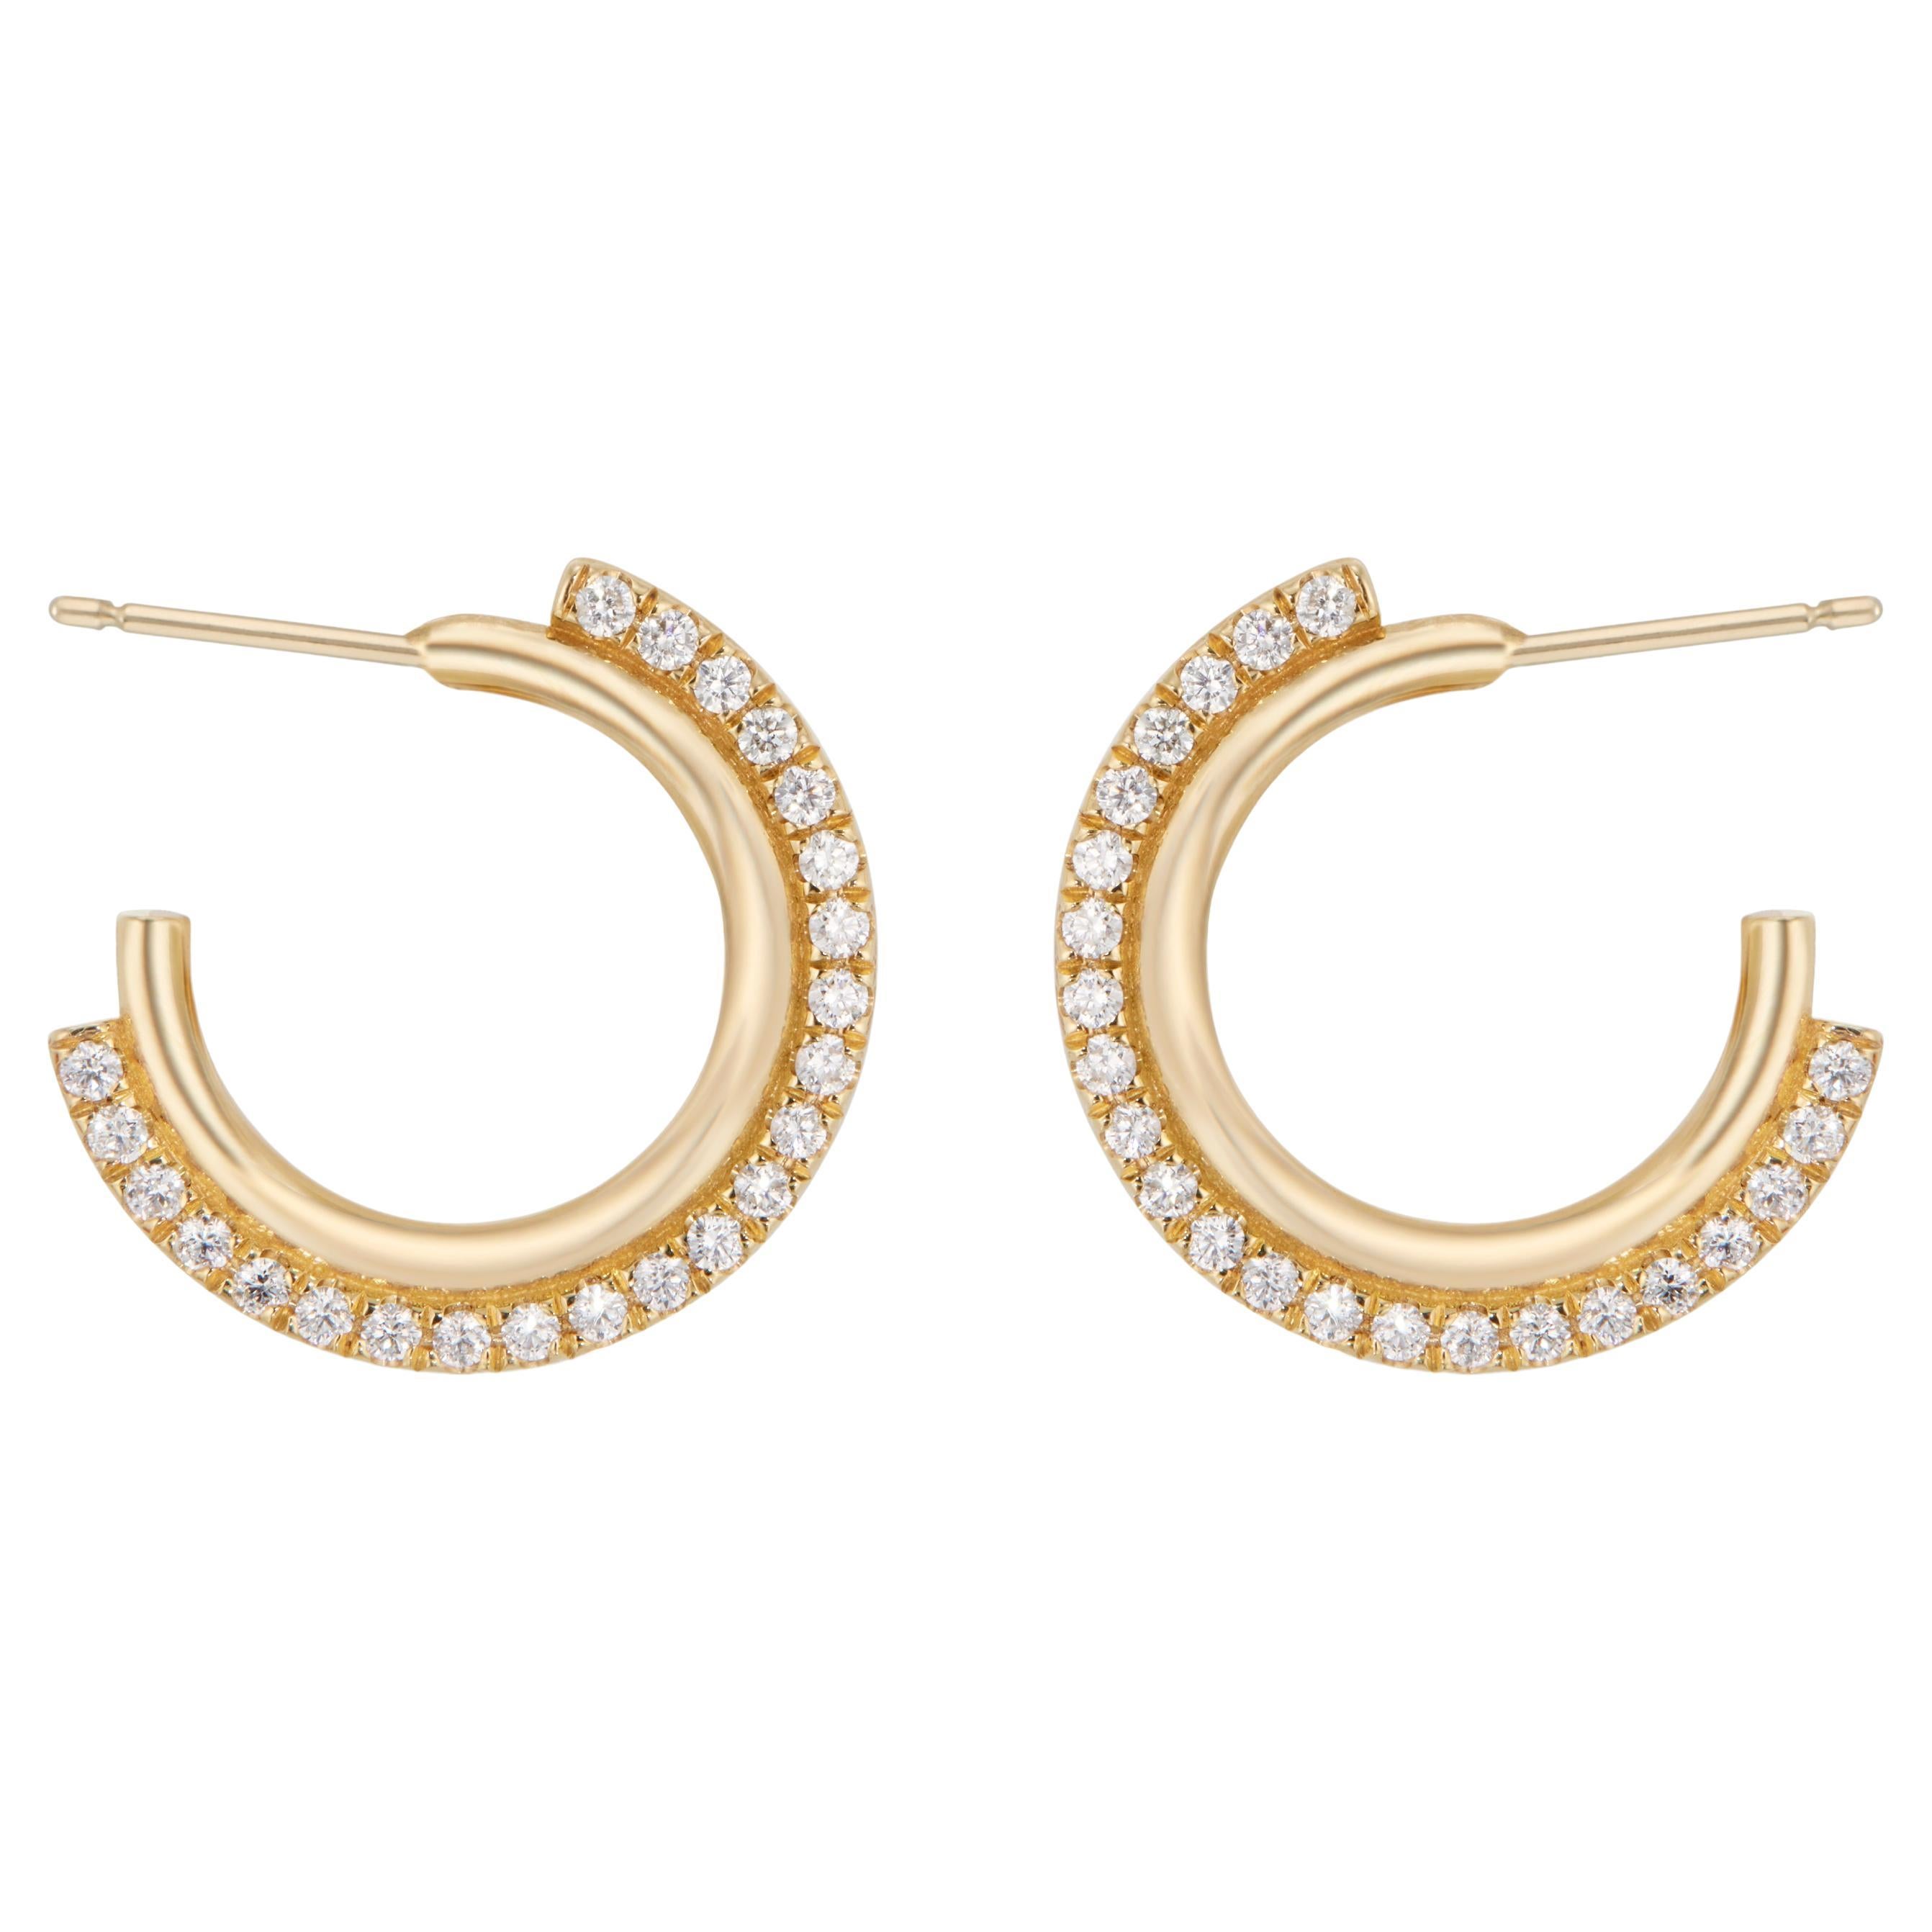 Casey Perez 14k Banded Gold Arc Hoops  with .58 carats of Brilliant Cut Diamonds